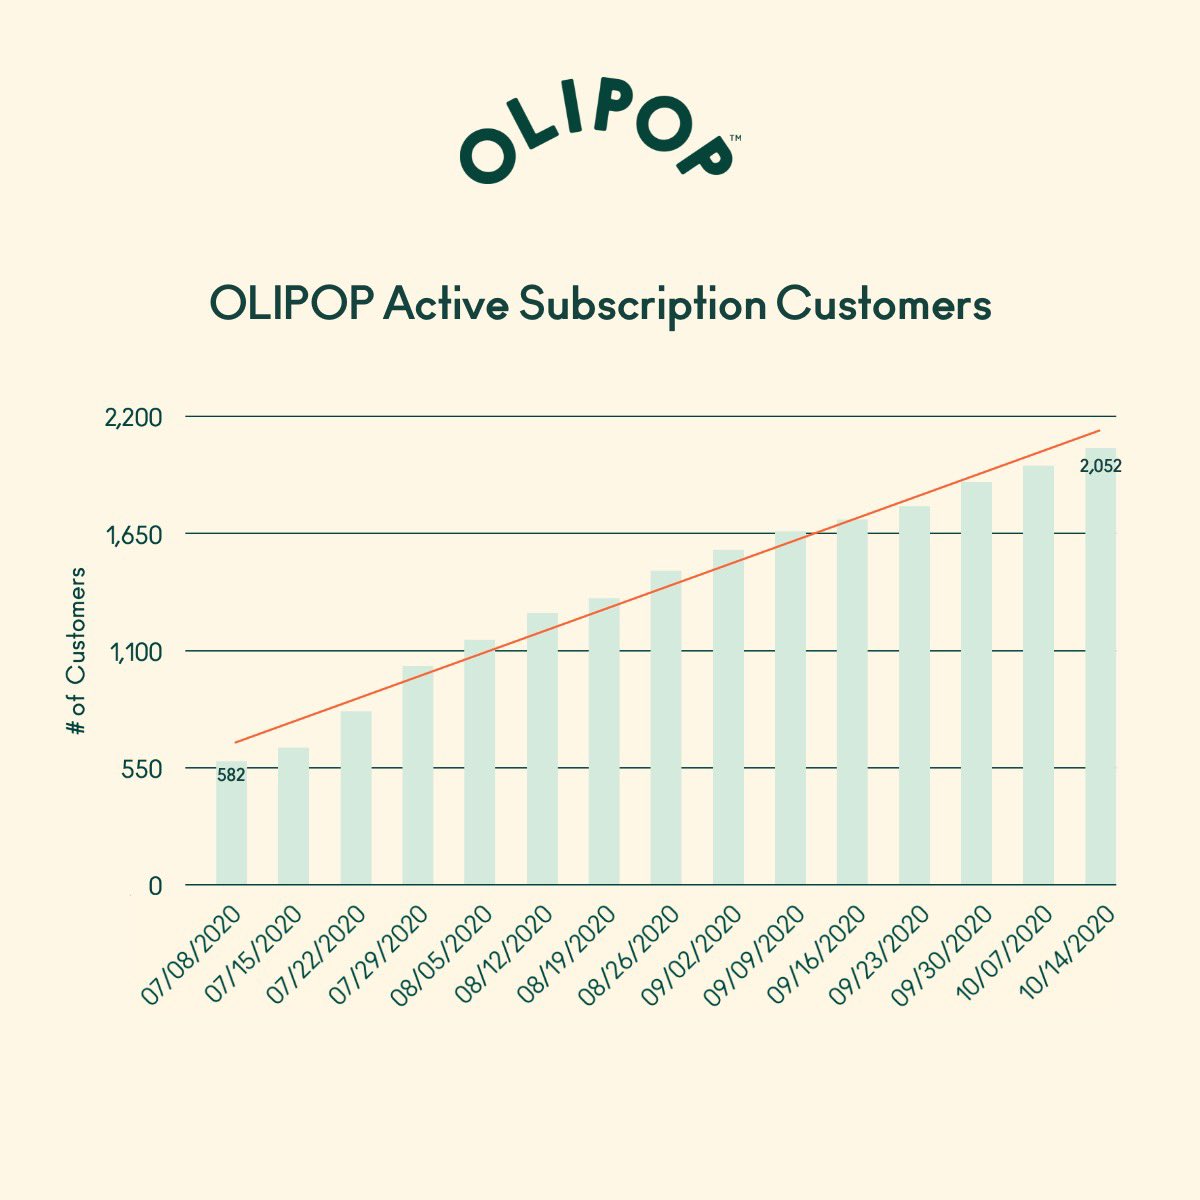 We just surpassed 2,000 subscription customers on our ecomm platform from a virtual standing start 90 days ago Here’s what we changed to get there:1/5